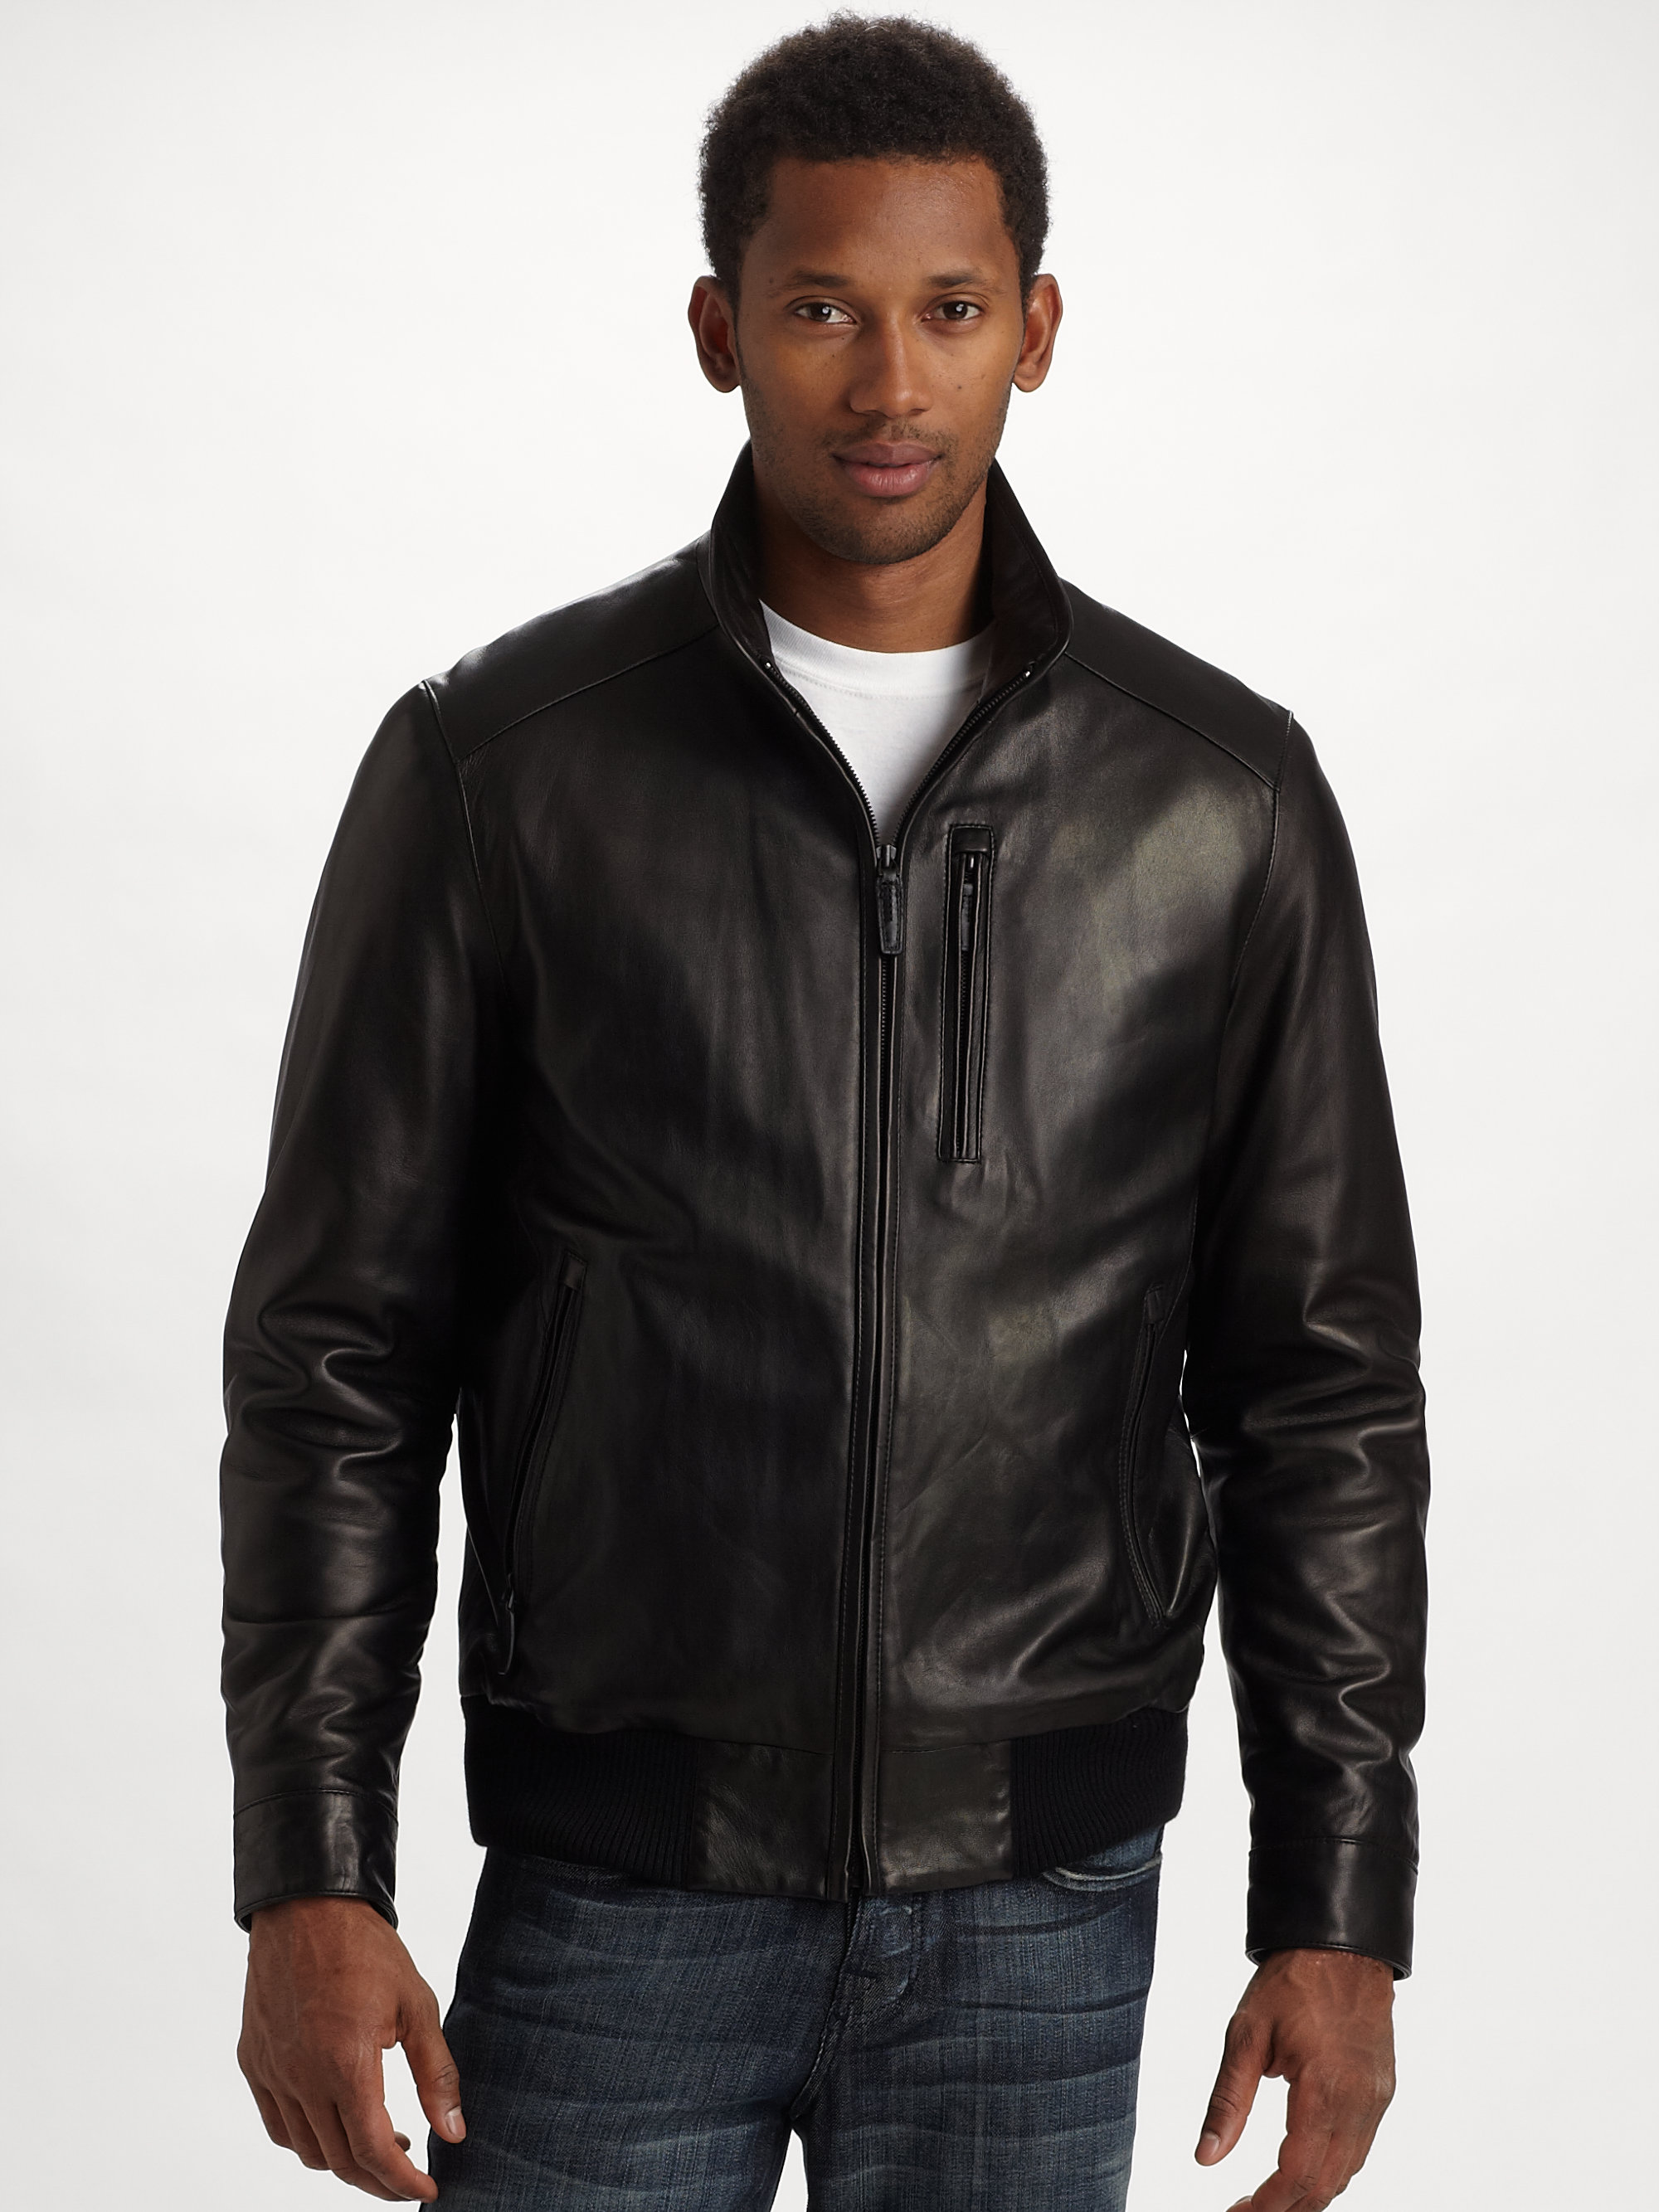 Lyst - Tumi Alpha Leather Bomber Jacket in Black for Men